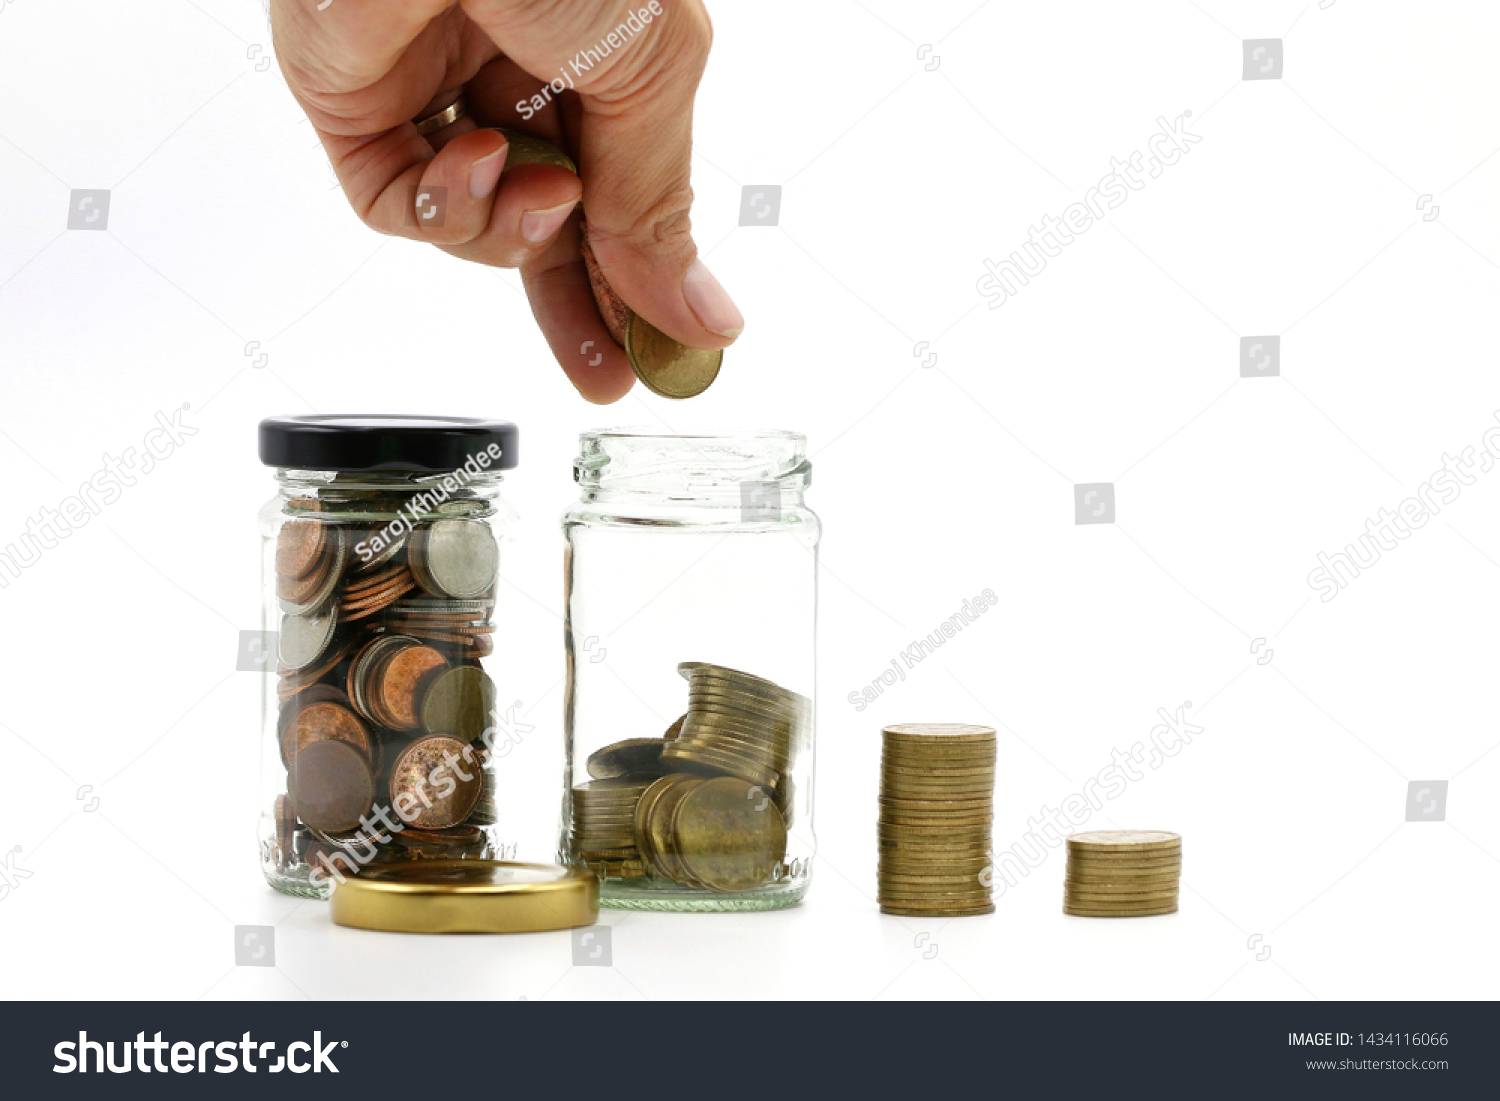 The hand is coin saving,saving in the saving box on white background with copy space. #1434116066